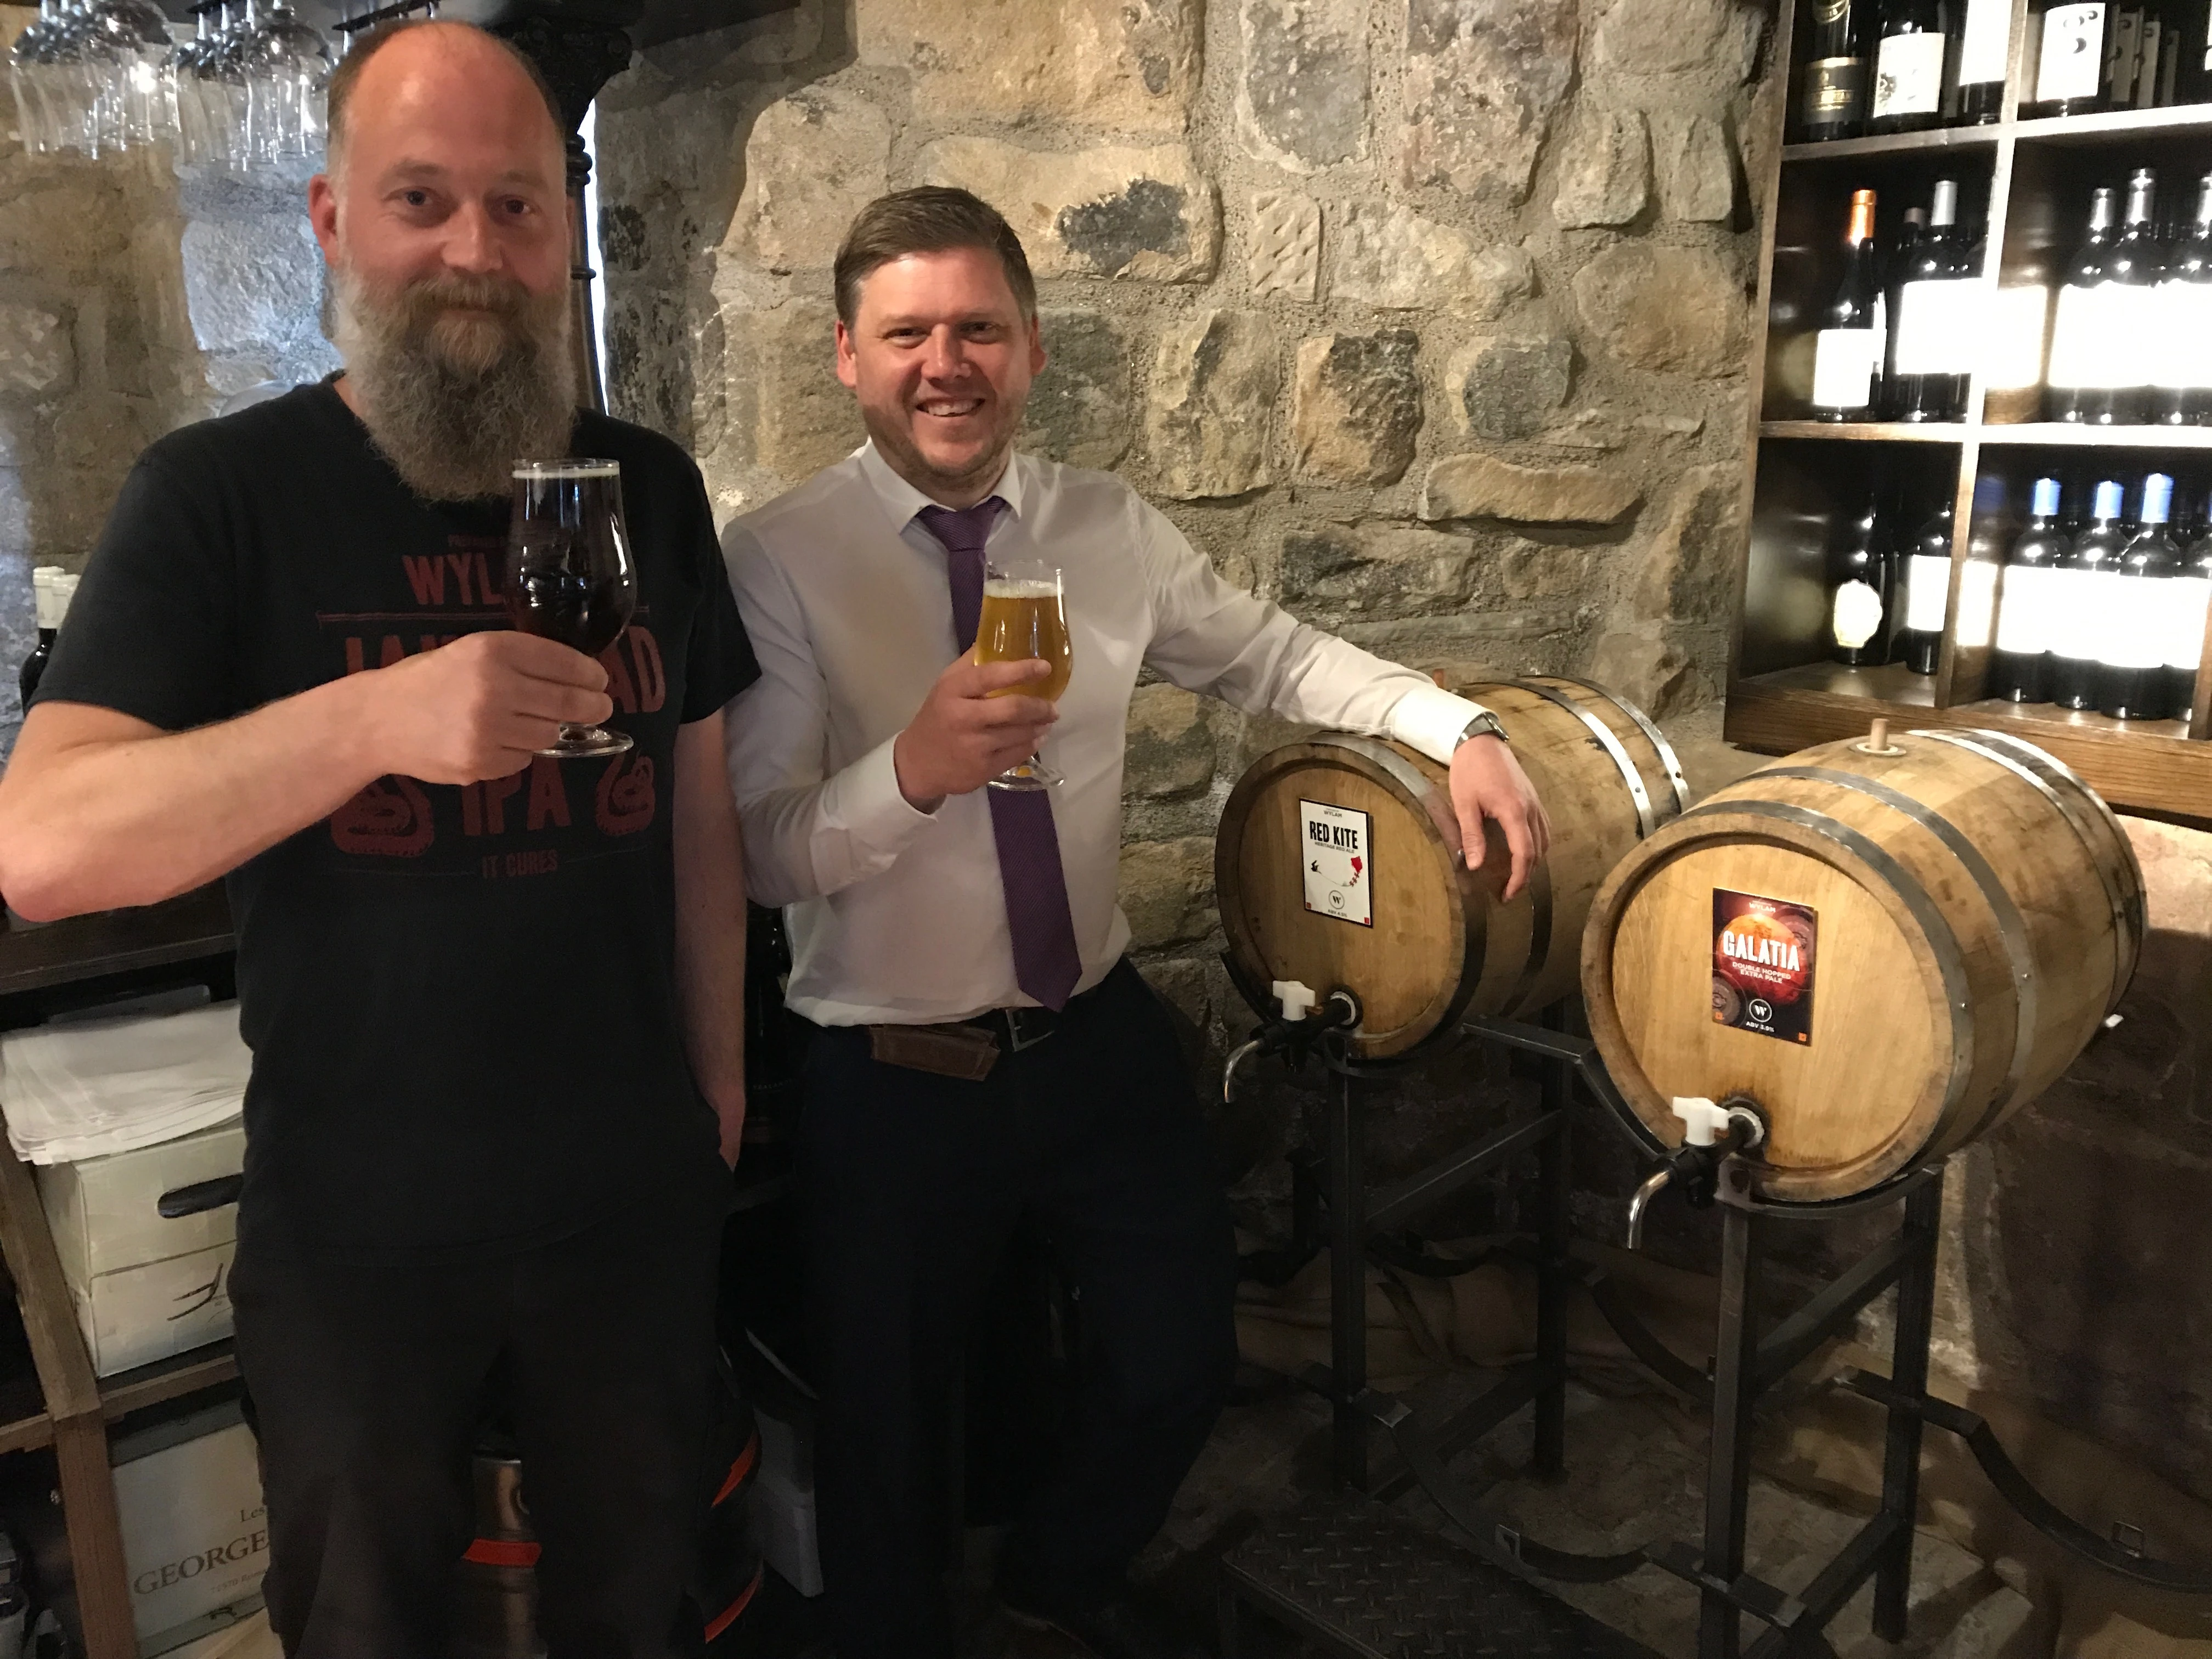 l-r Ben Wilkinson from Wylam Brewery and James Scrimgeour from Blackfriars Restaurant 